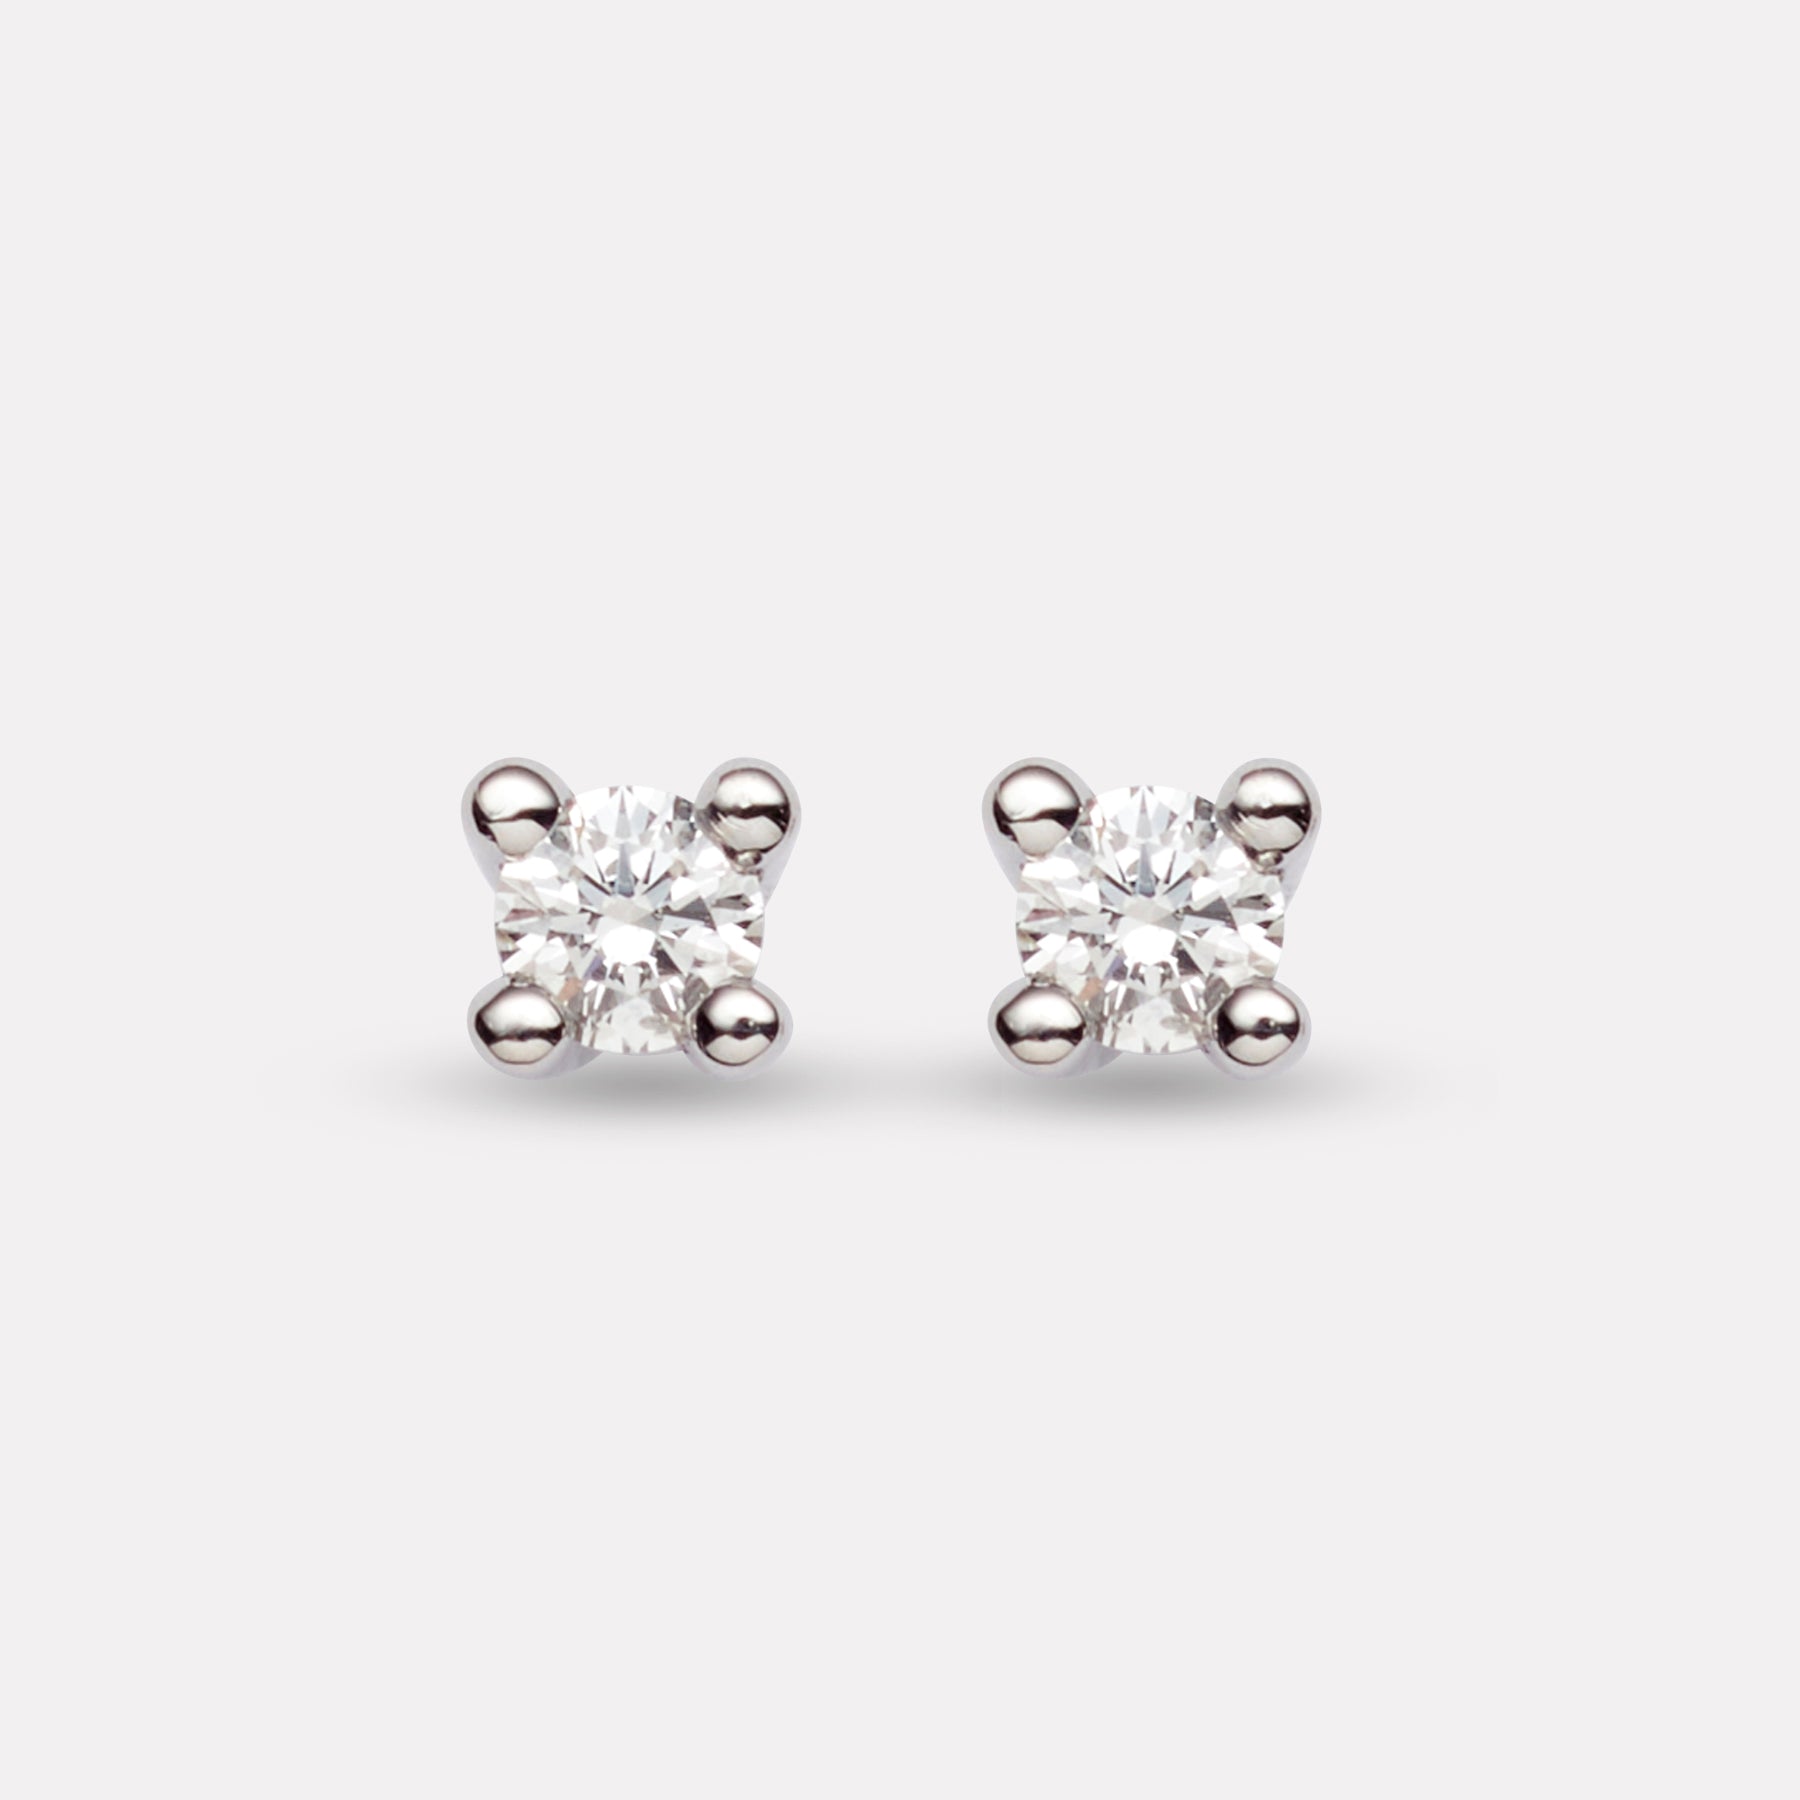 Karin earrings in white gold with diamonds